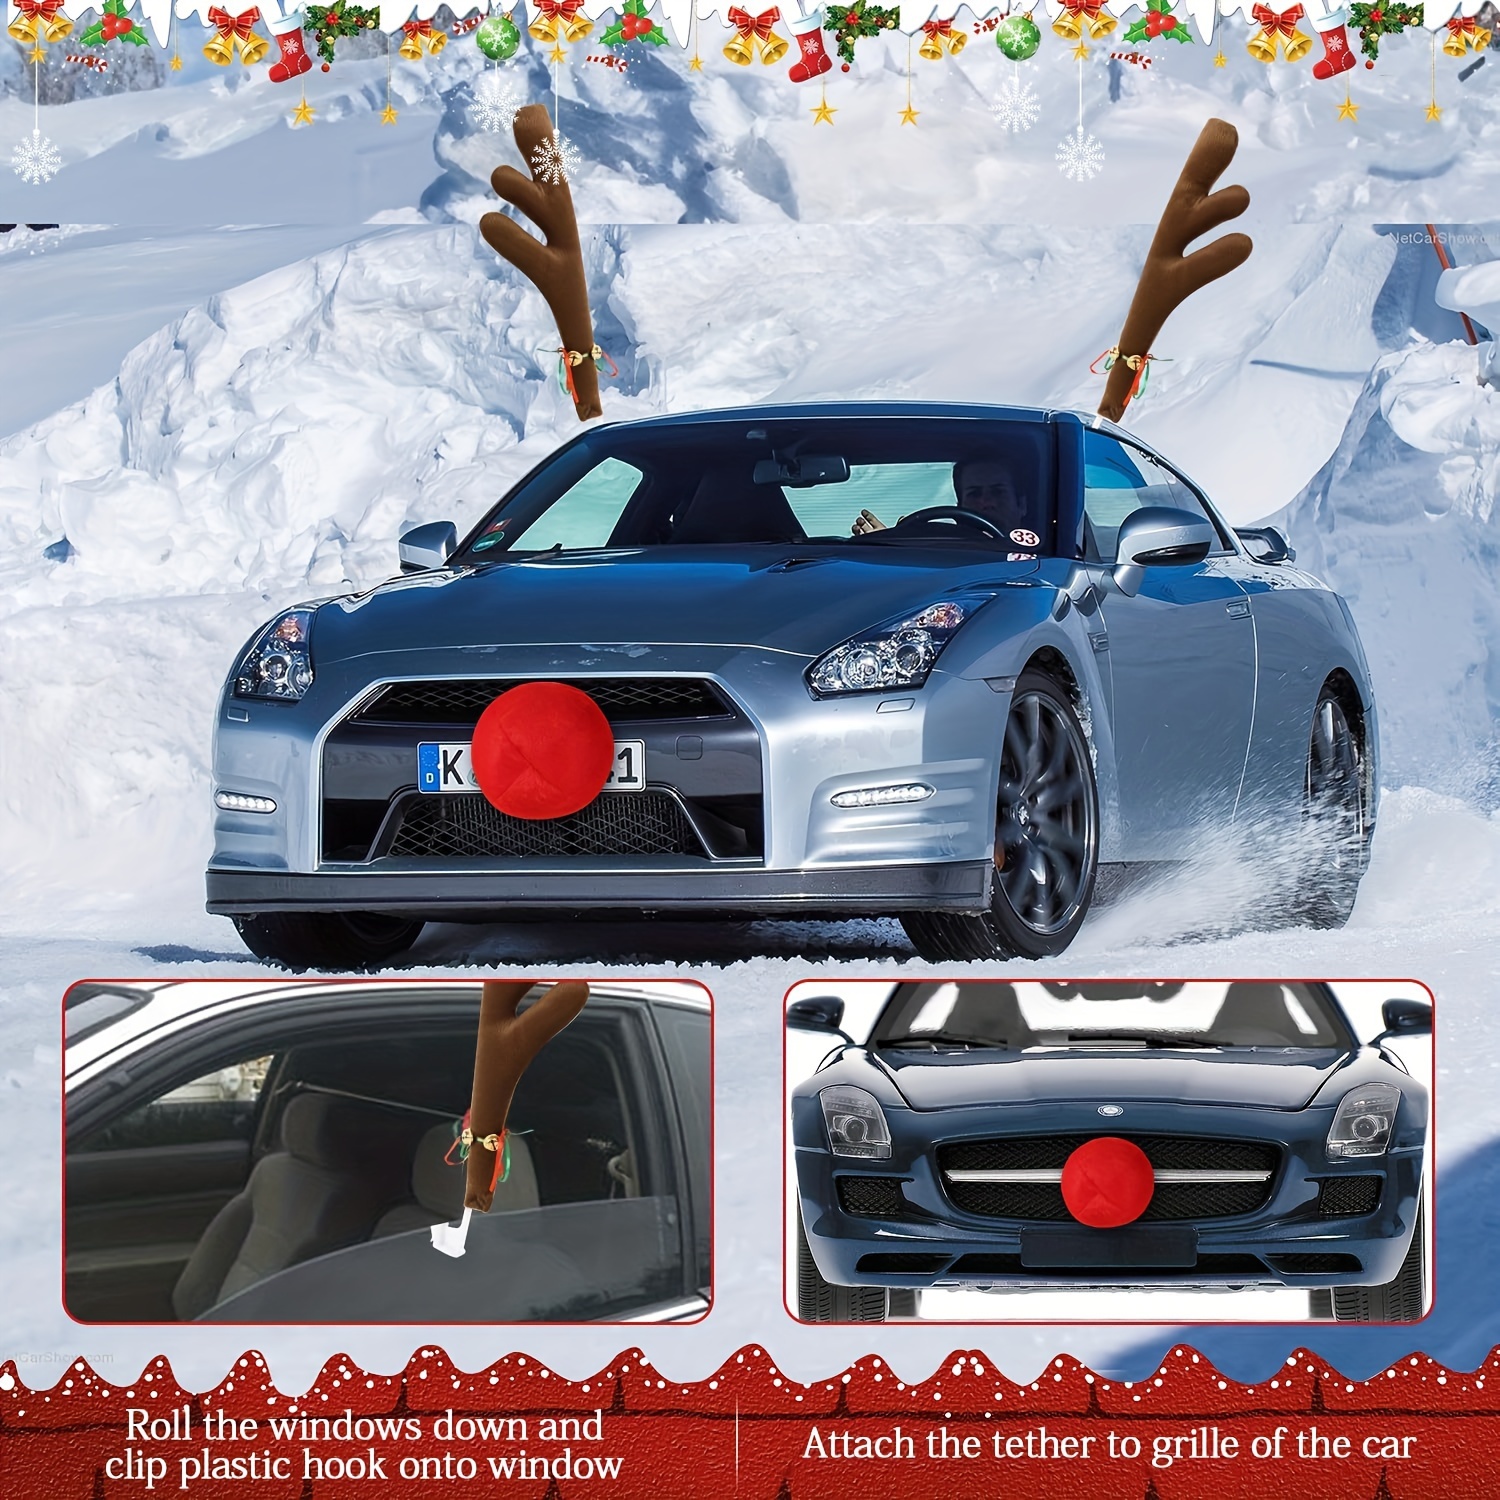 Car Reindeer Antlers & Nose Full Set - Christmas Decorations for Car -  Window Roof-Top & Grille Rudolph Reindeer Kit - Auto Holiday Accessories  Decoration Kit Best for Car SUV Van Truck 